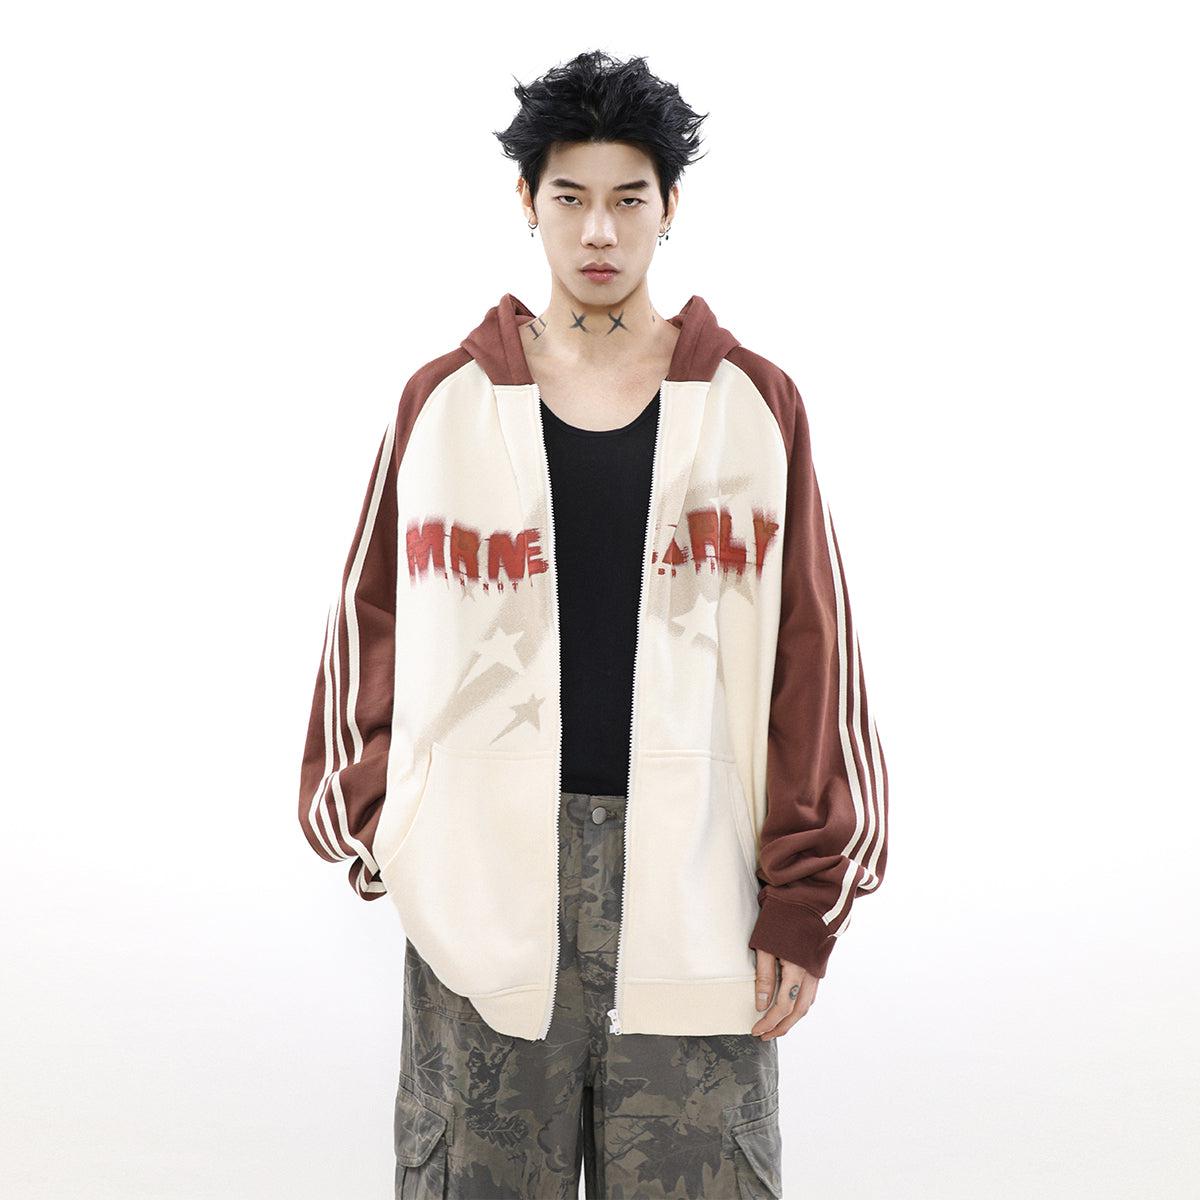 Logo Casual Side Stripes Hoodie Korean Street Fashion Hoodie By Mr Nearly Shop Online at OH Vault